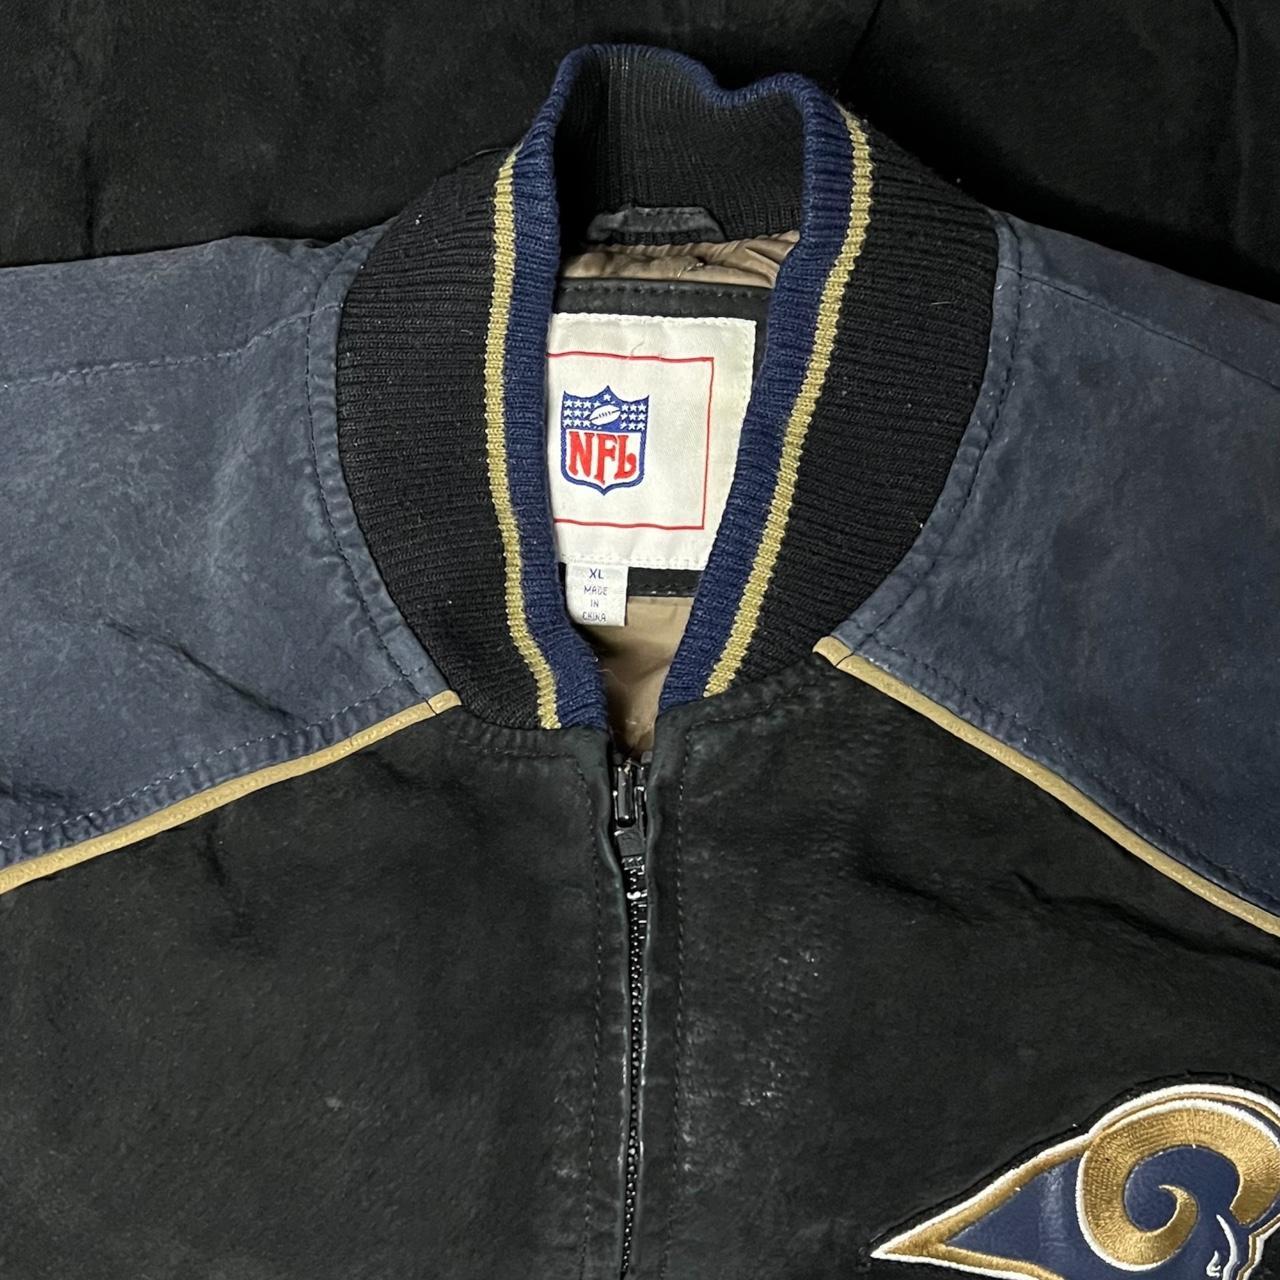 Product Image 4 - Retro Rams Jacket

- Great Condition!
-